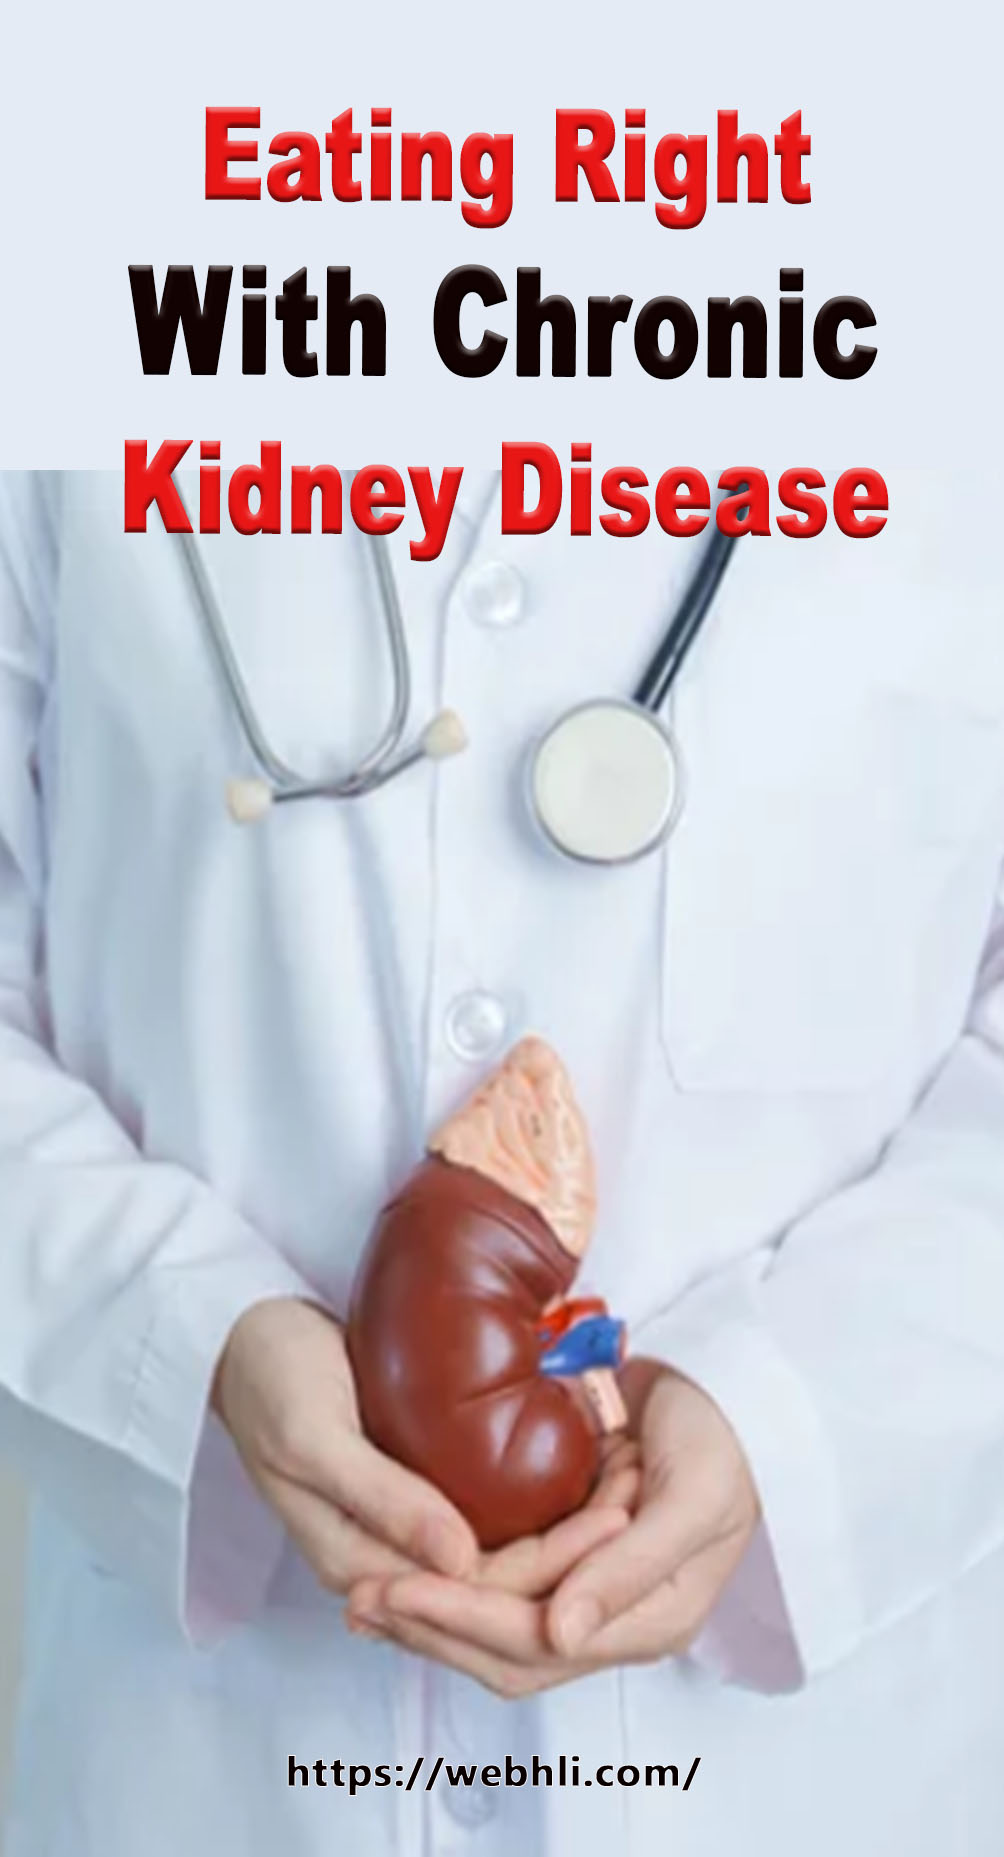 Eating Right With Chronic Kidney Disease | Healthy Lifestyle